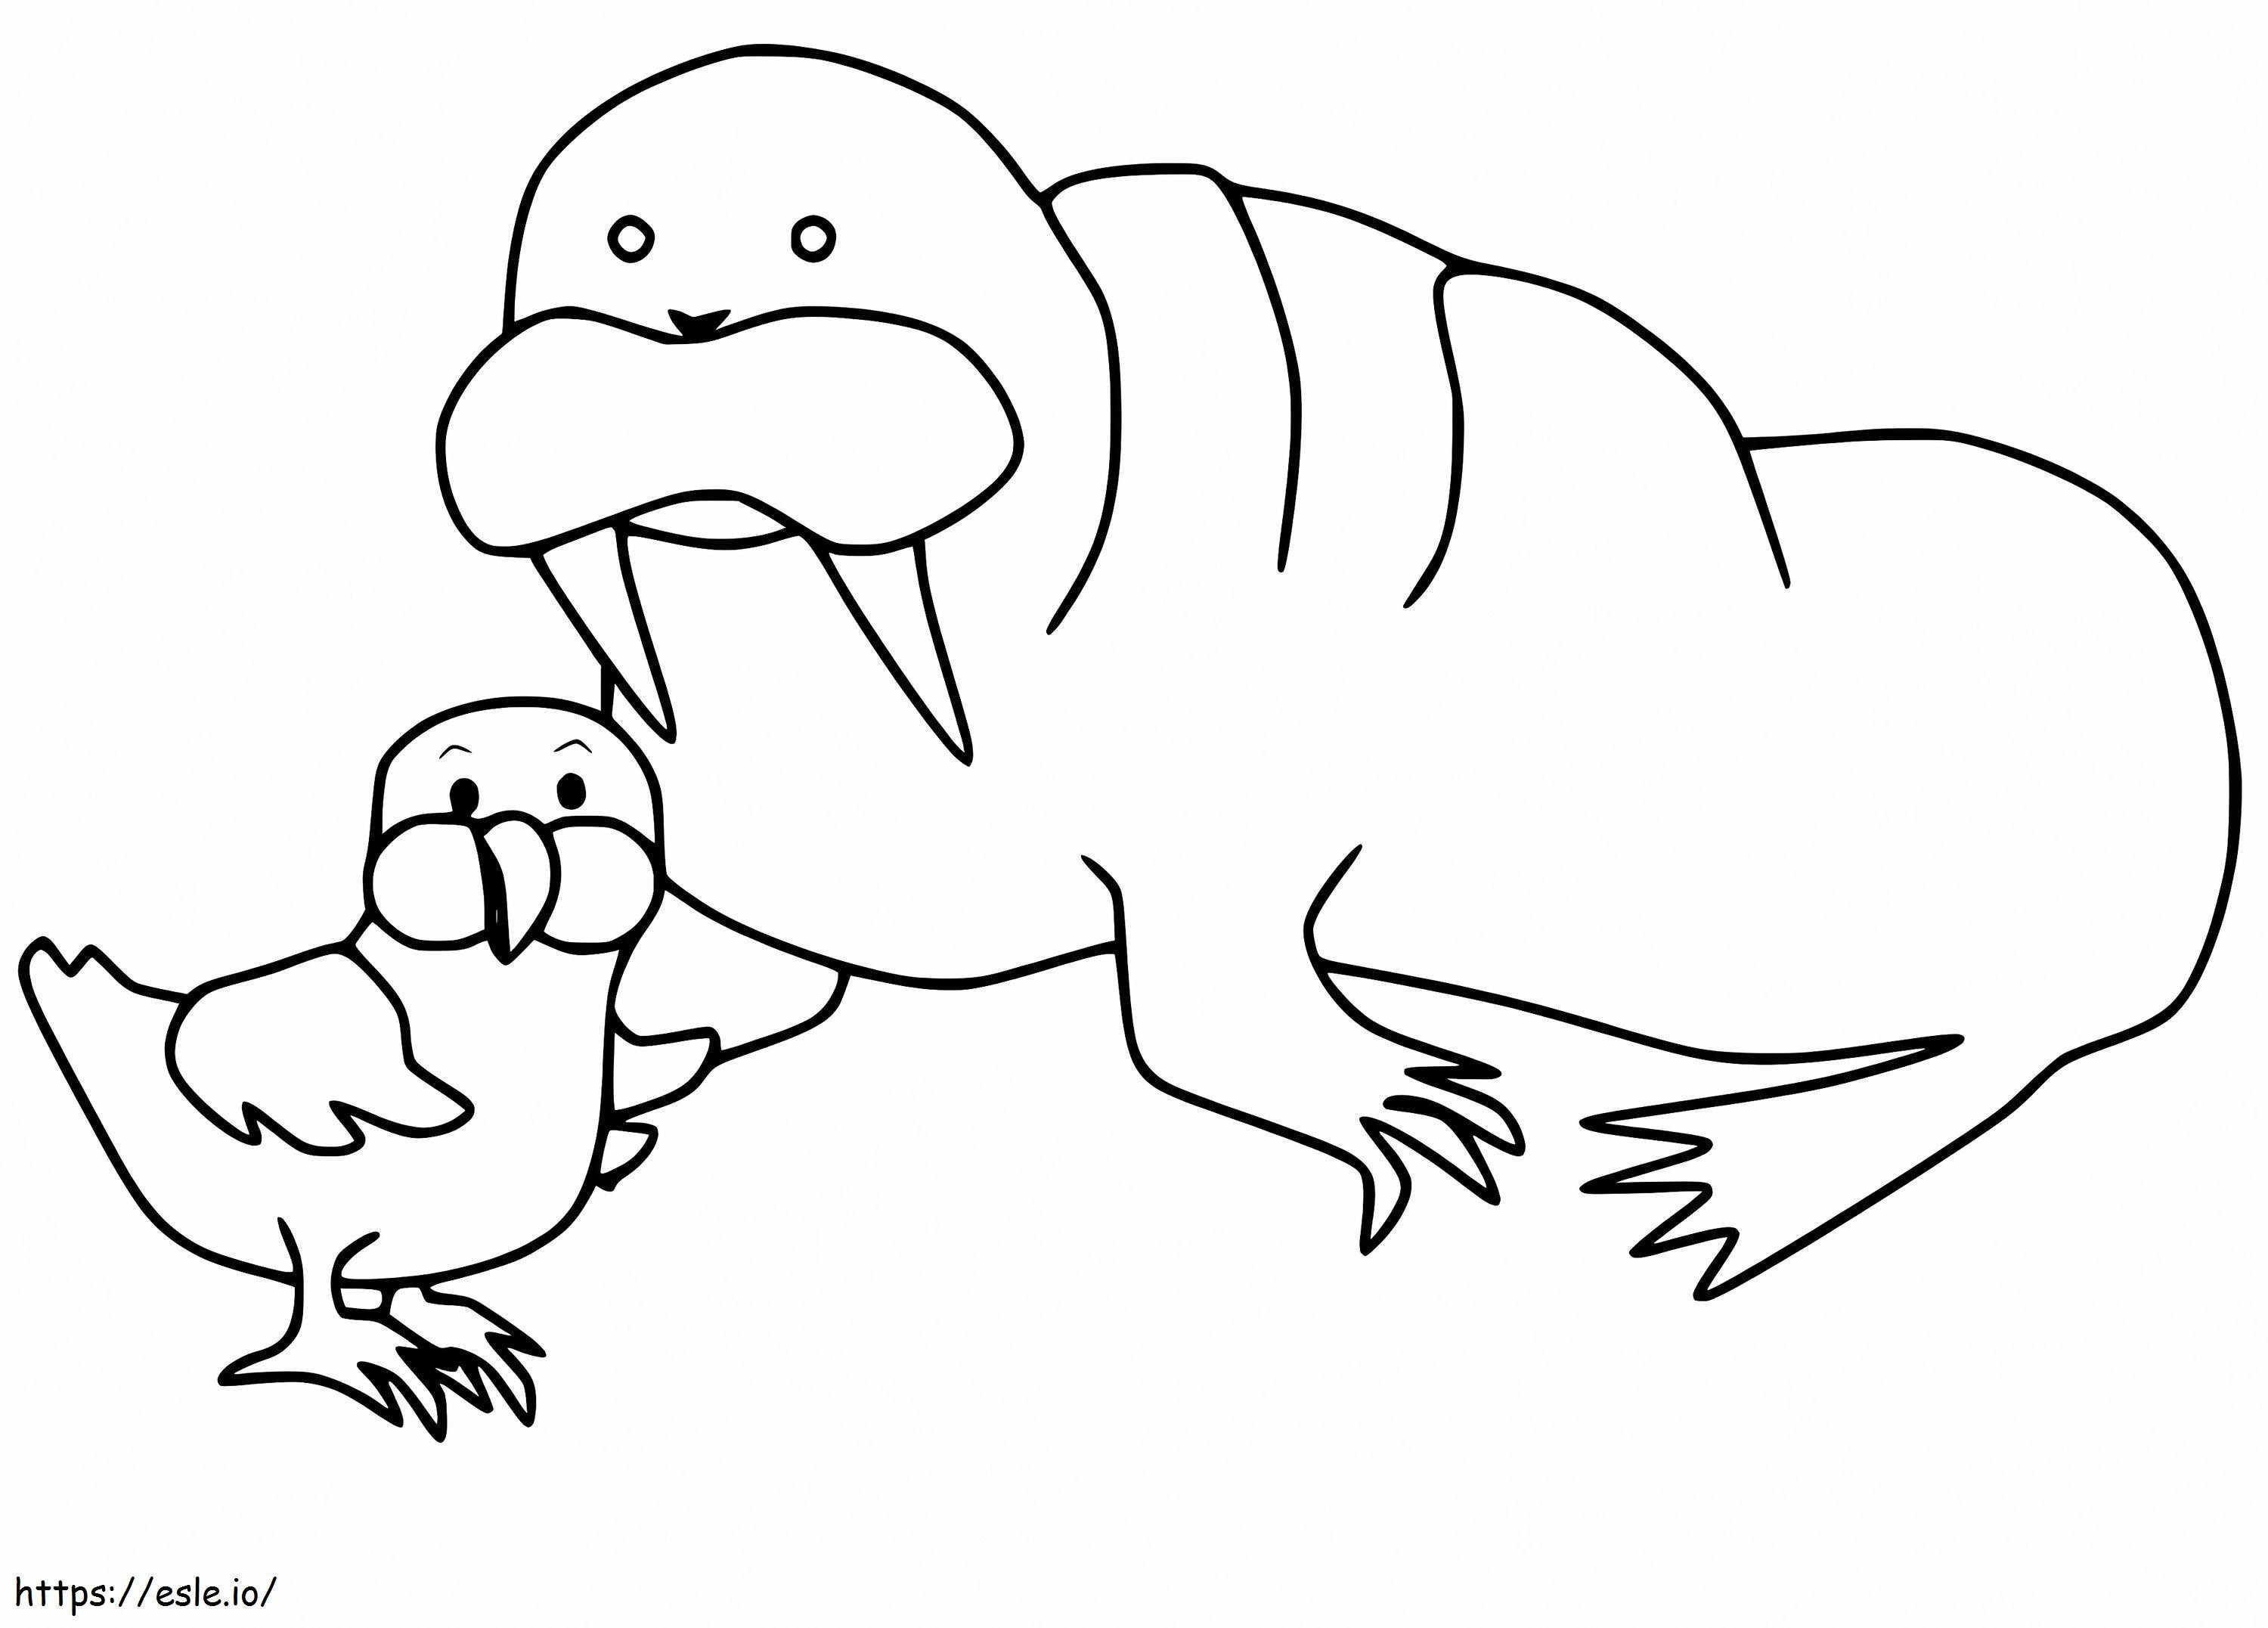 Walrus And Chicken coloring page